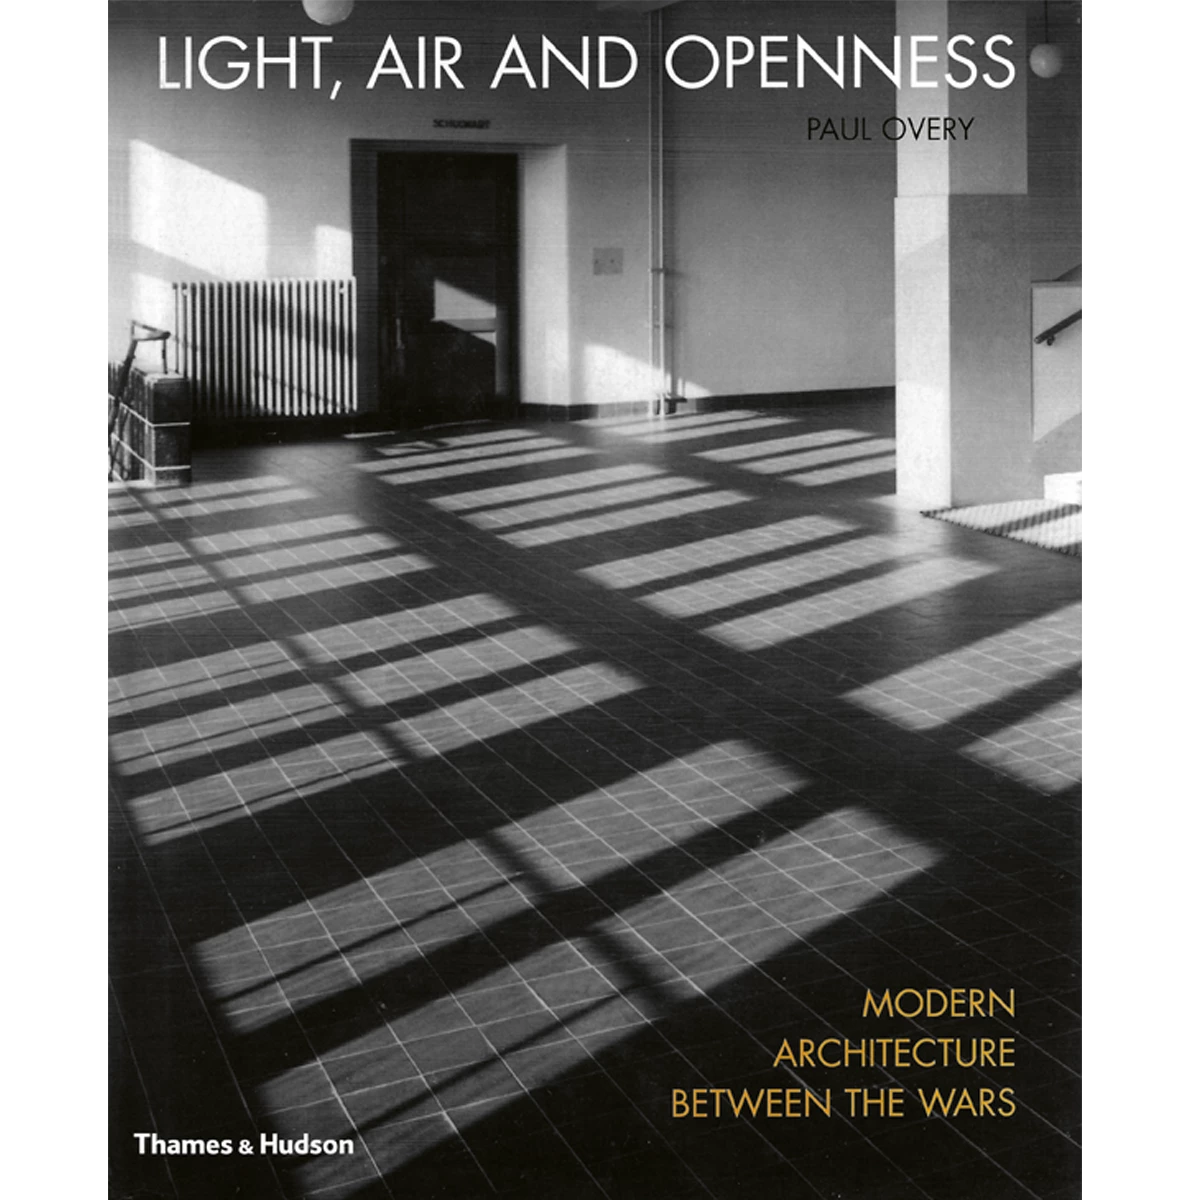 Light, Air and Openness